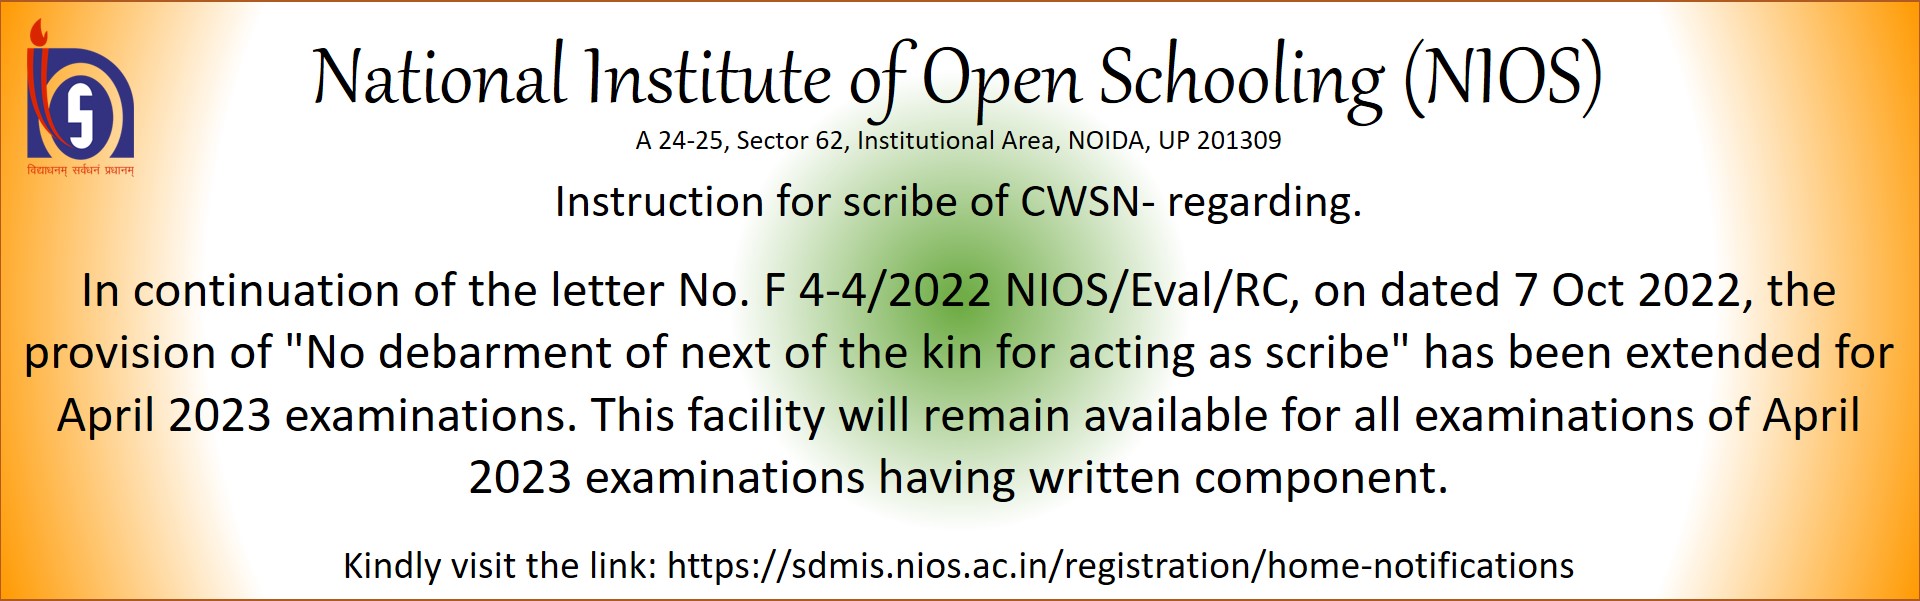 nios assignment submission date